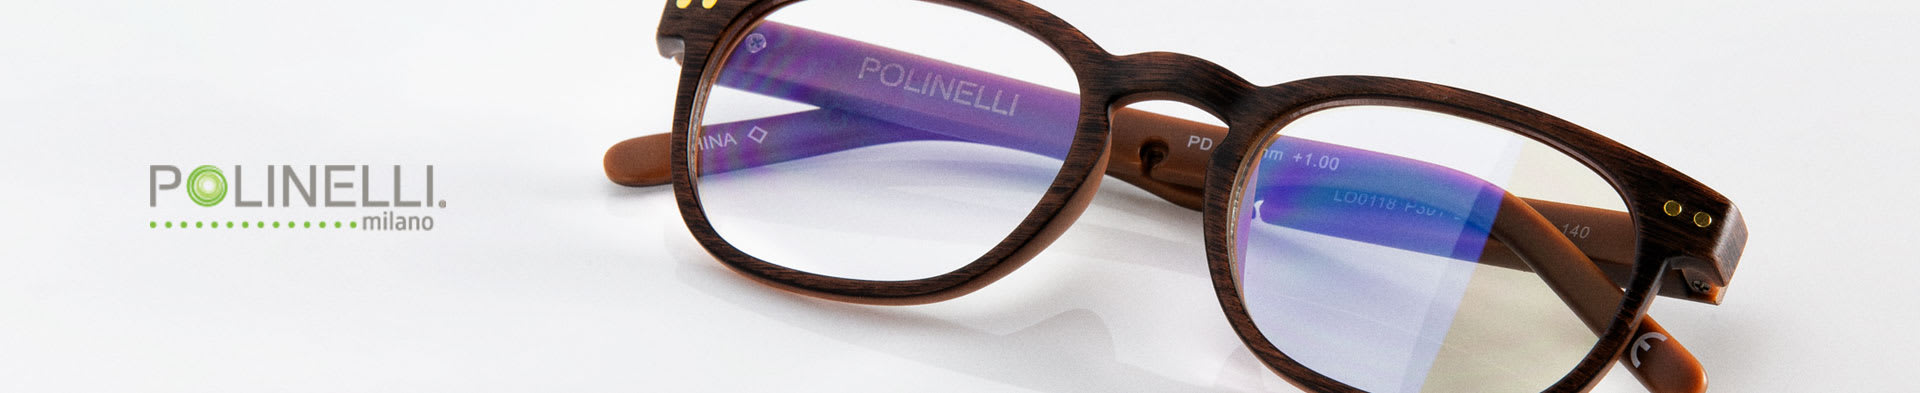 Shop Polinelli Milano Readers Eyeglasses - model P301 featured